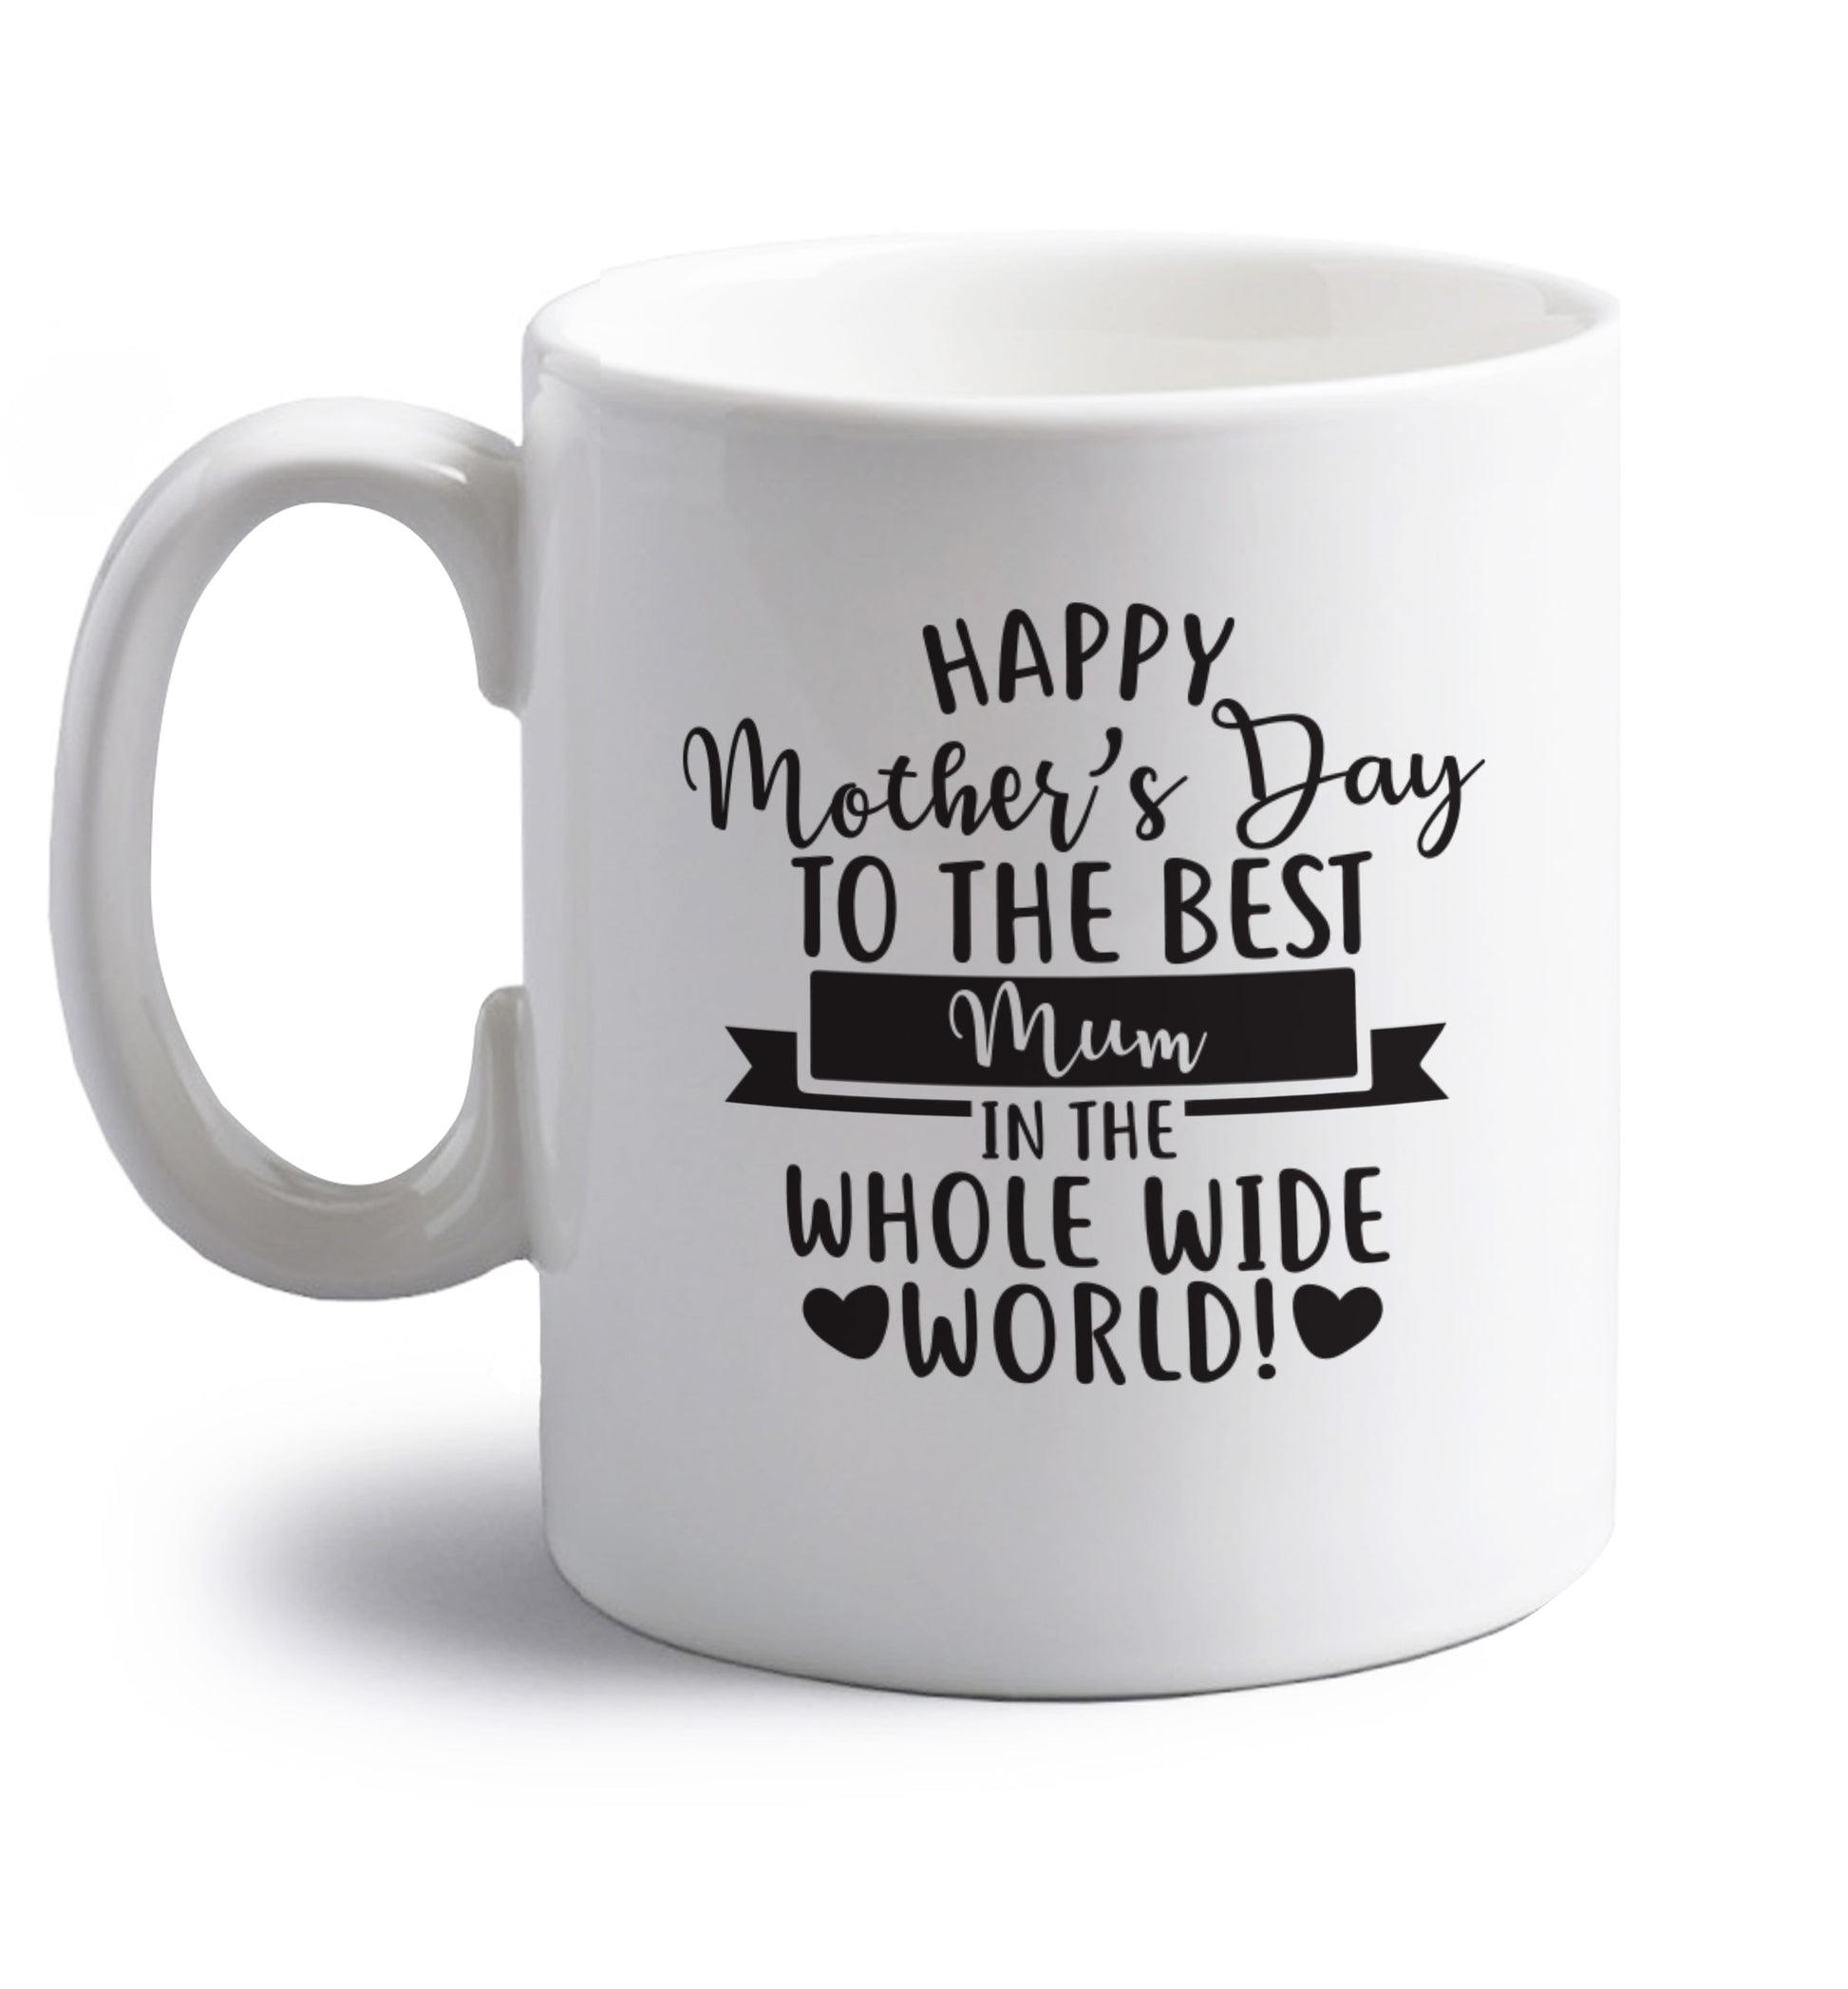 Happy Mother's Day to the best mum in the whole wide world! right handed white ceramic mug 